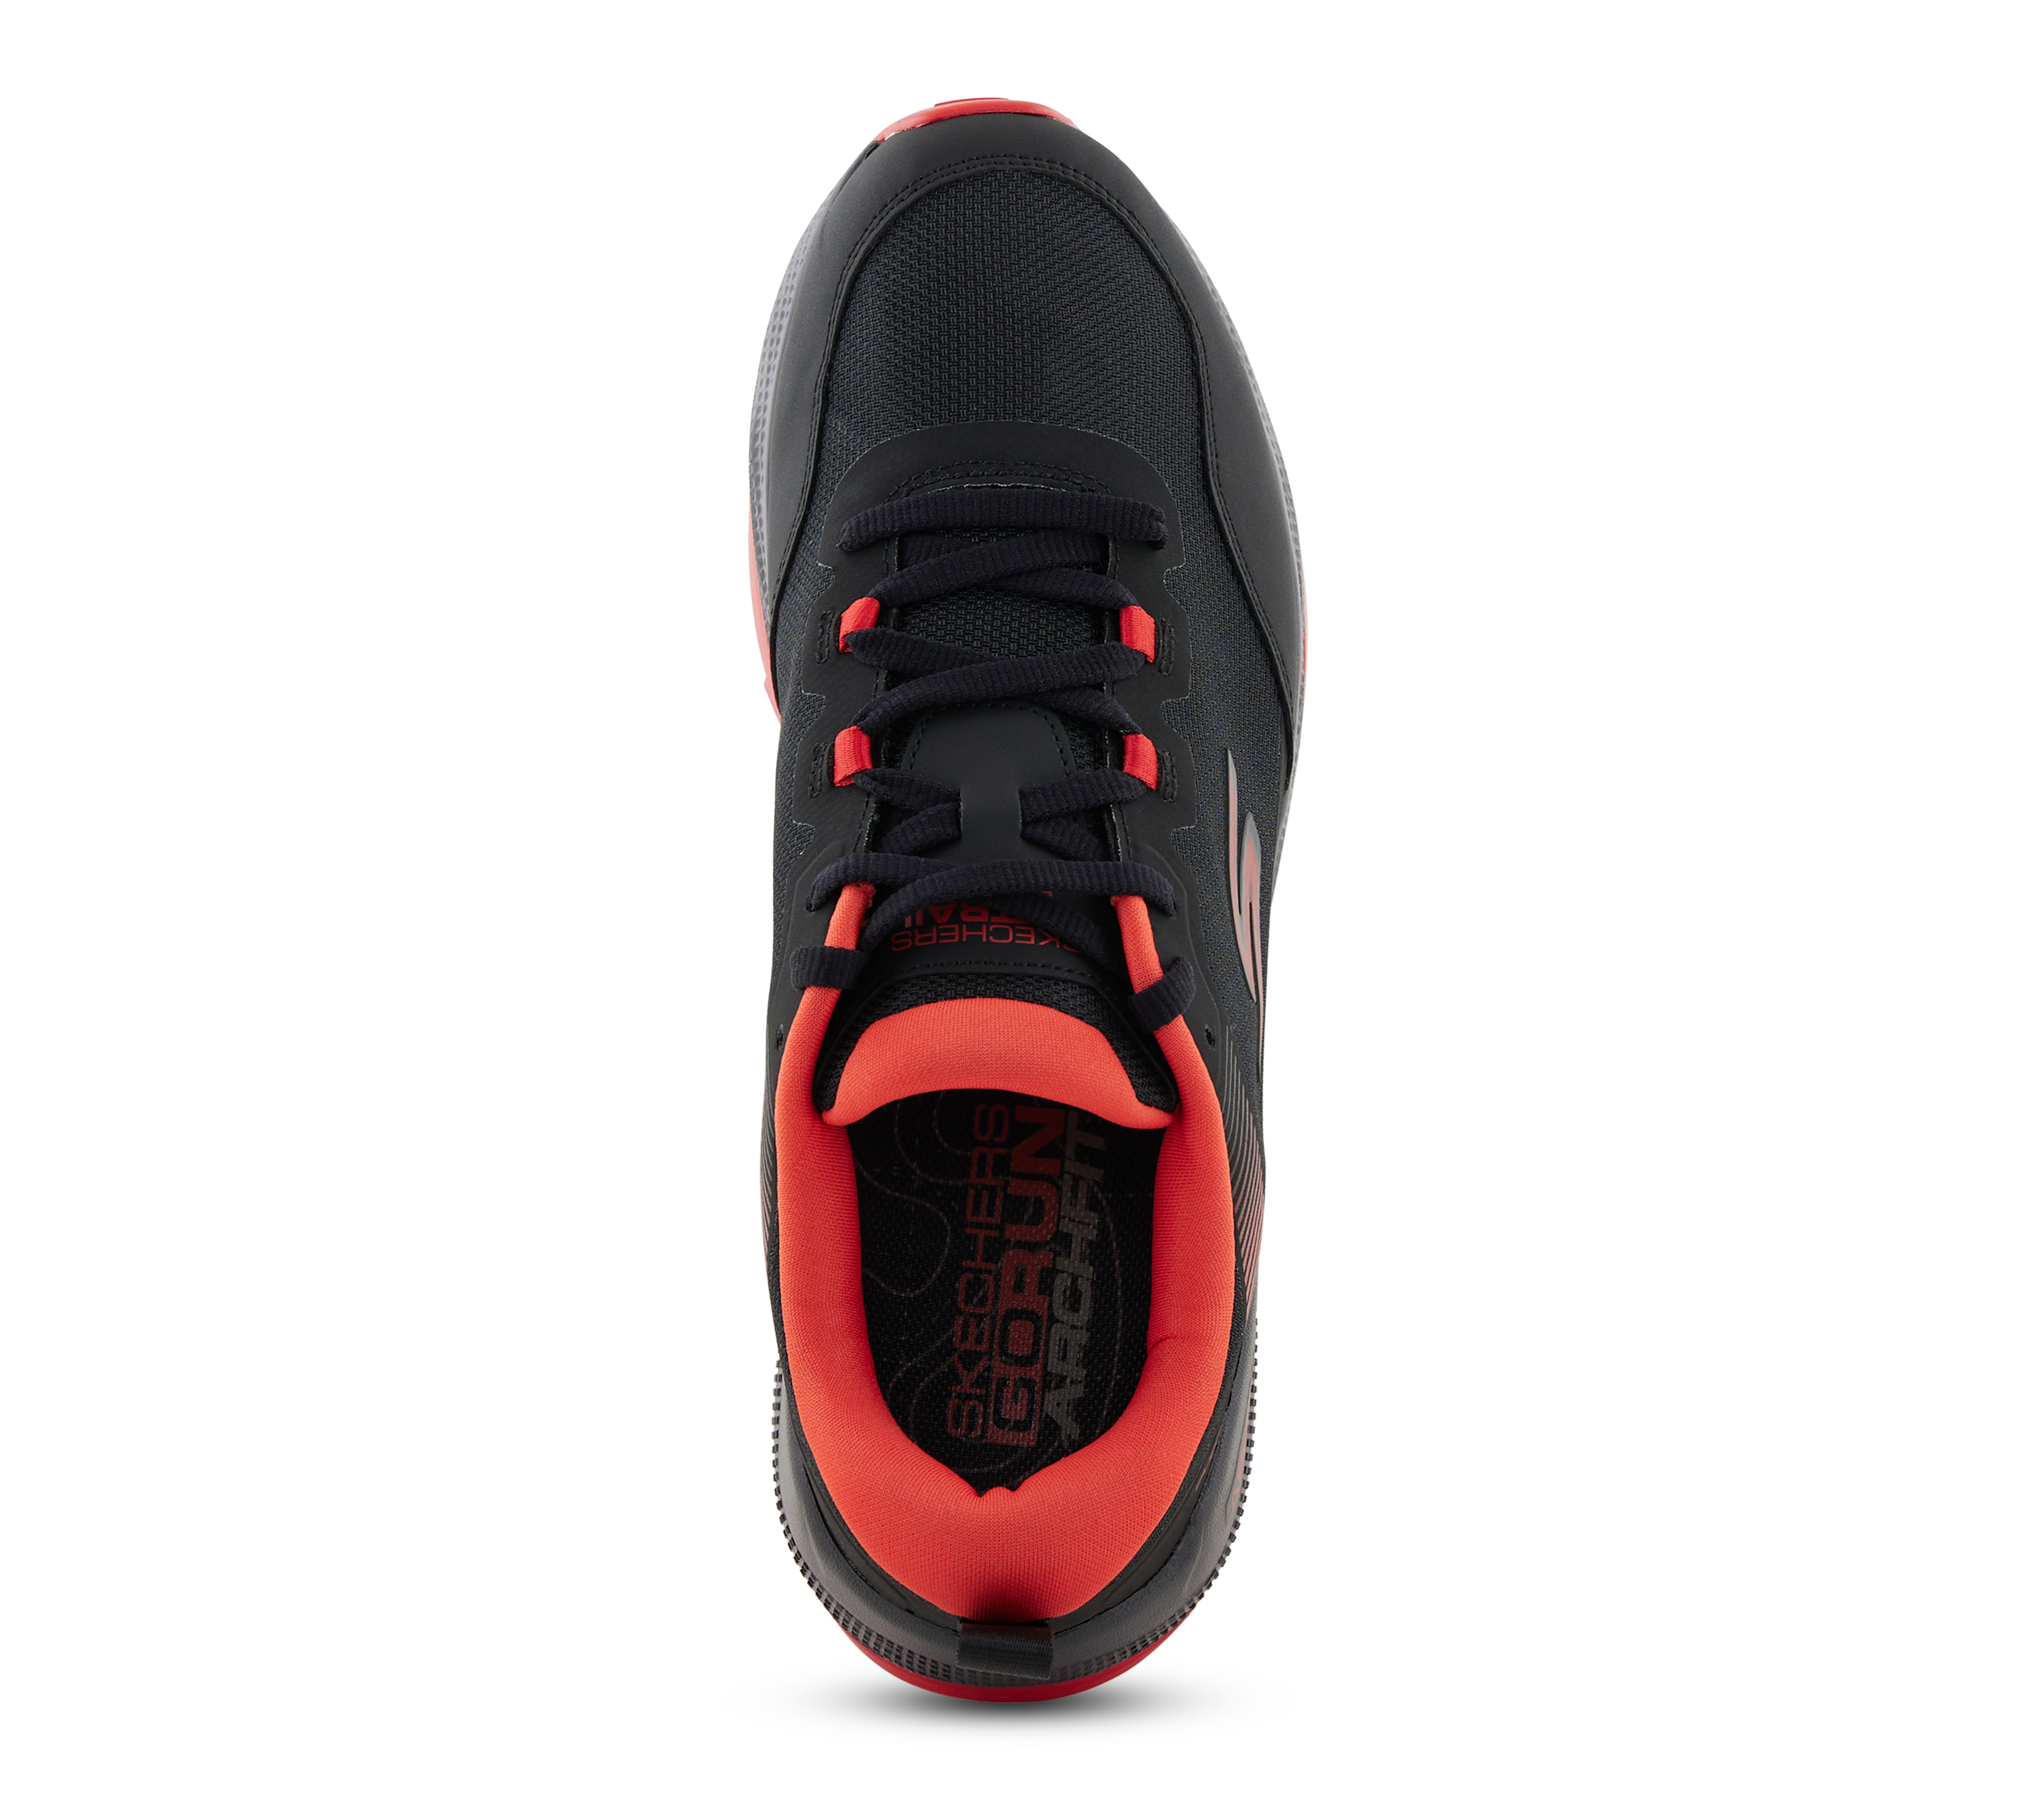 GO RUN PURE TRAIL 2 - VALLEY, BLACK/RED Footwear Top View